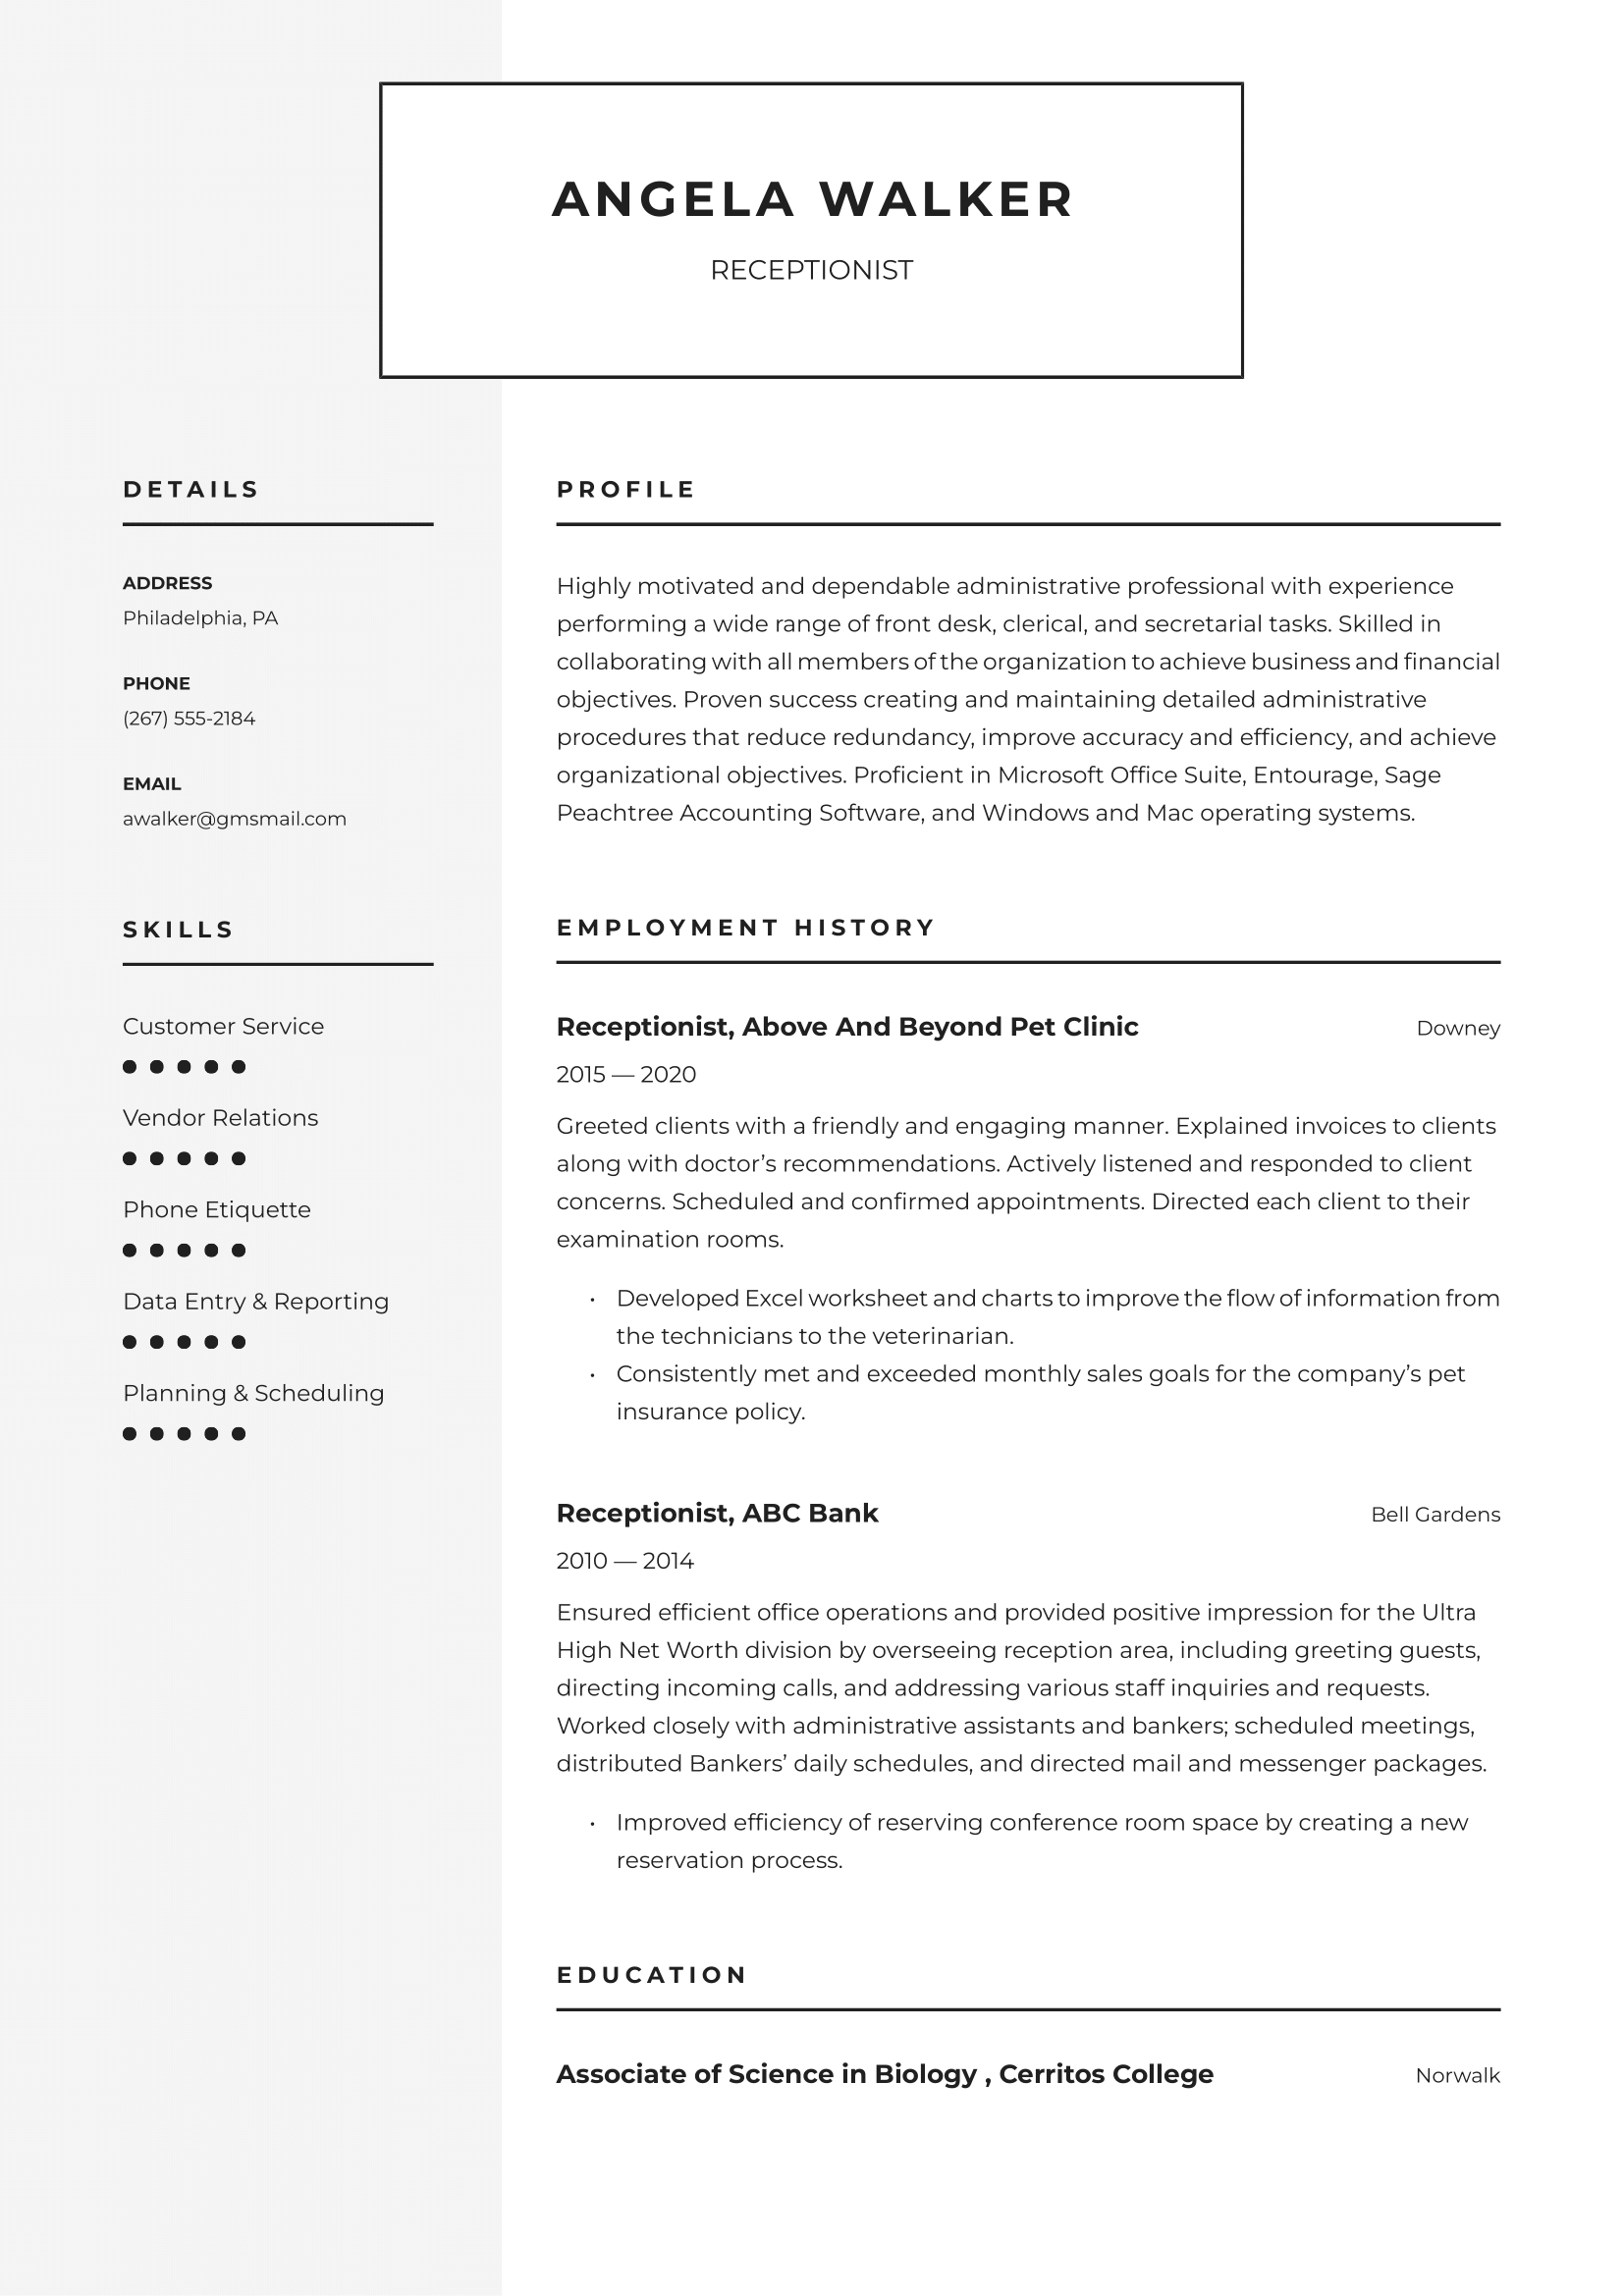 Receptionist_Resume-Example.png